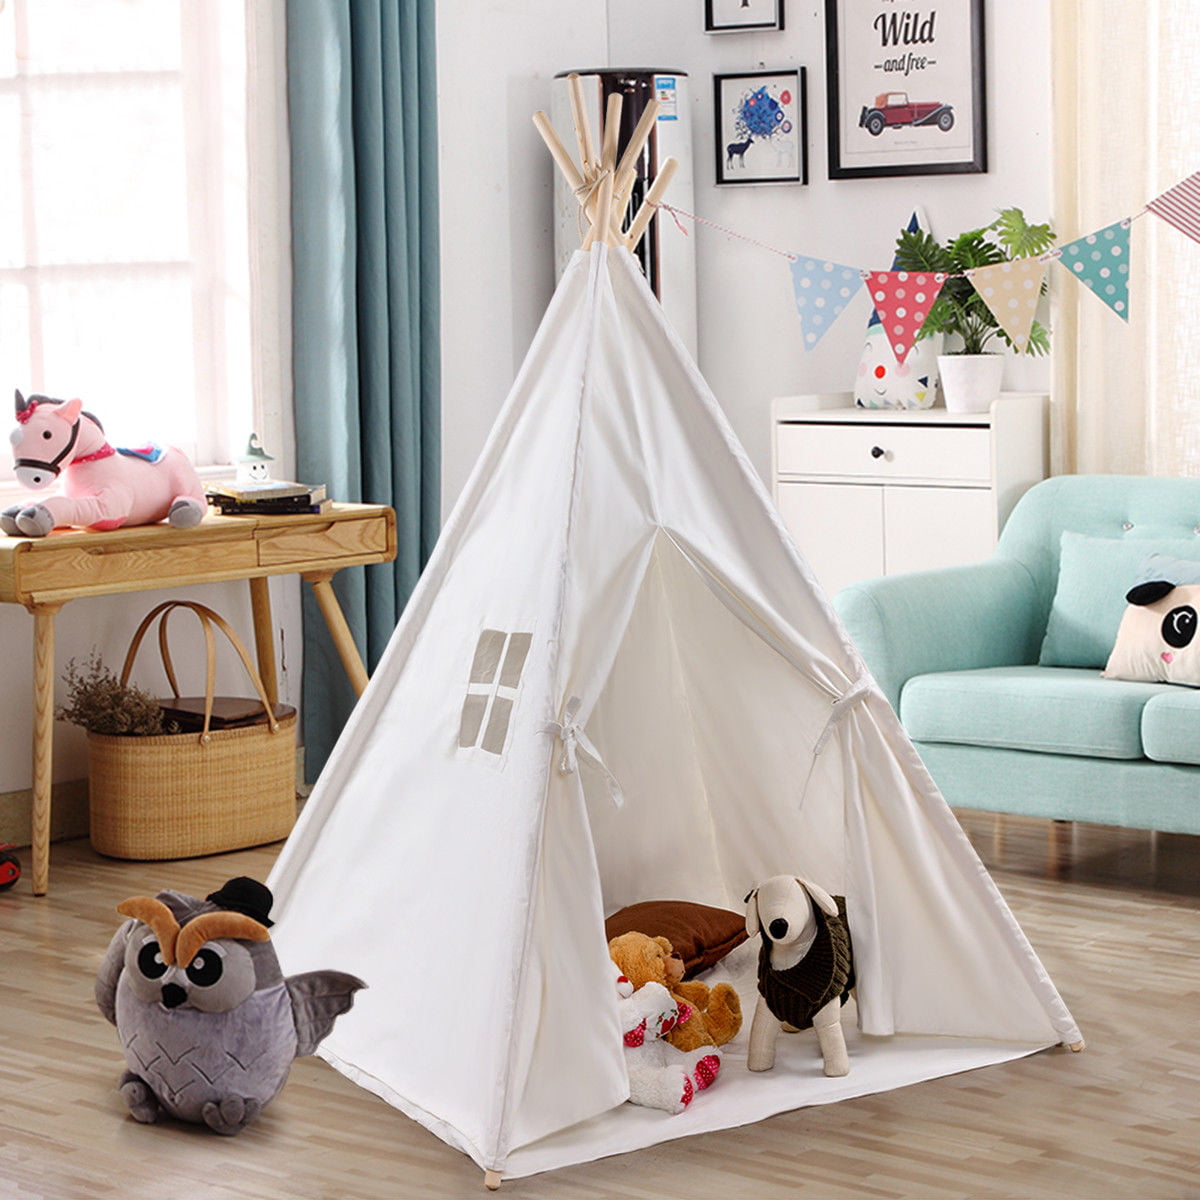 White Teepee Play Tent Kids Canvas Playhouse Sleeping Dome w/ Carrying Bag White 